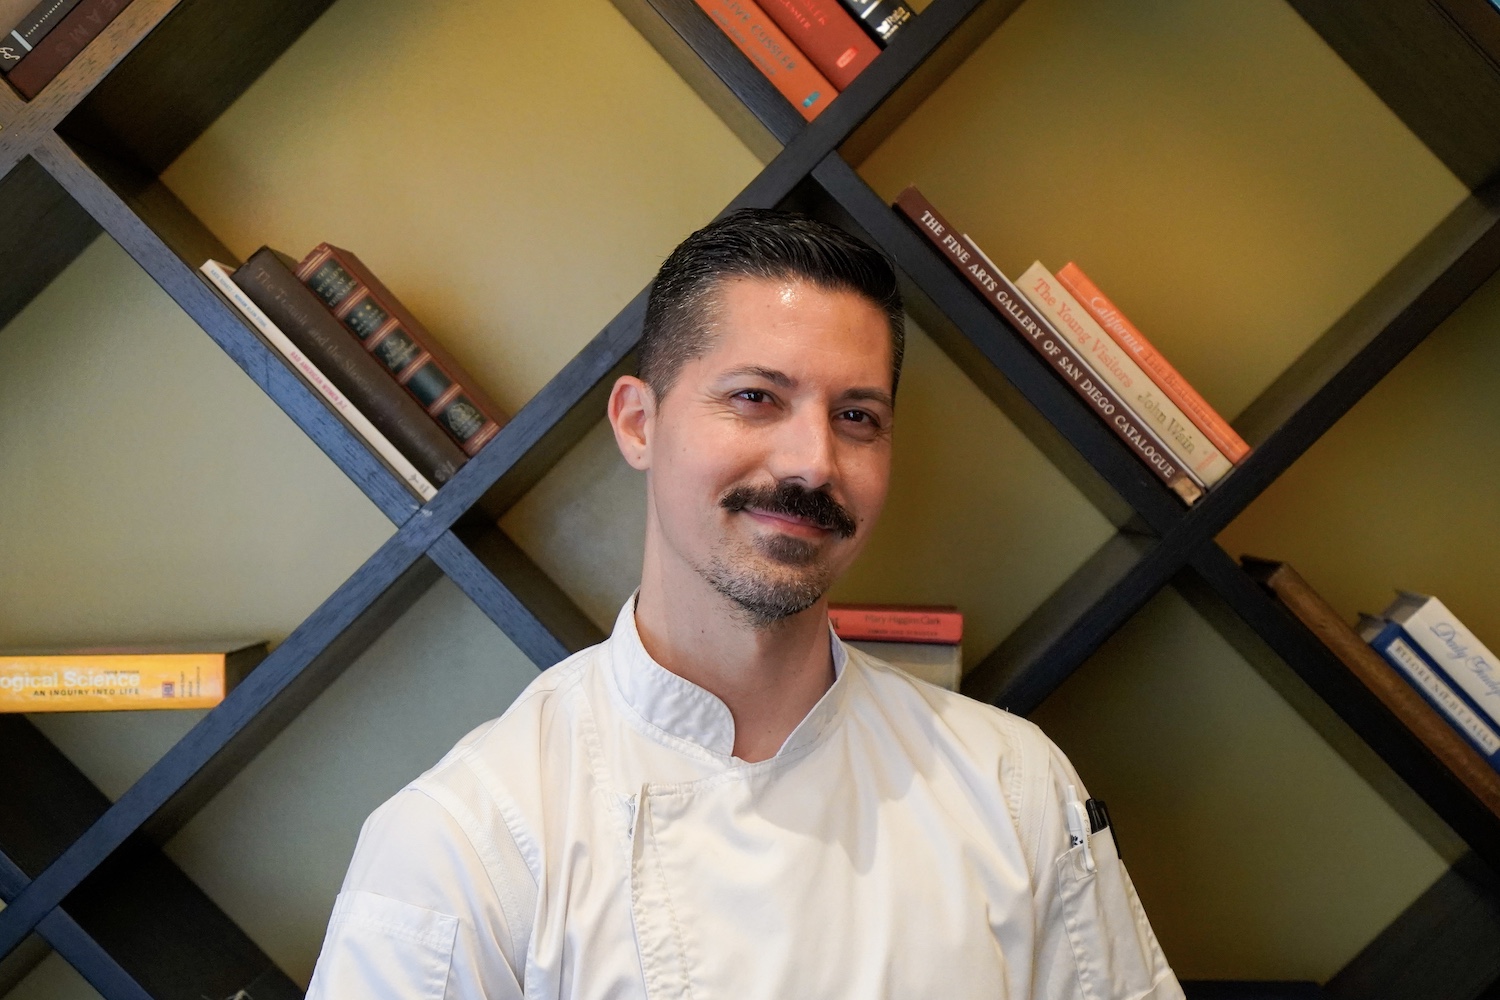 Former Wayfarer Pastry Chef to Open Knead Bakery in San Diego